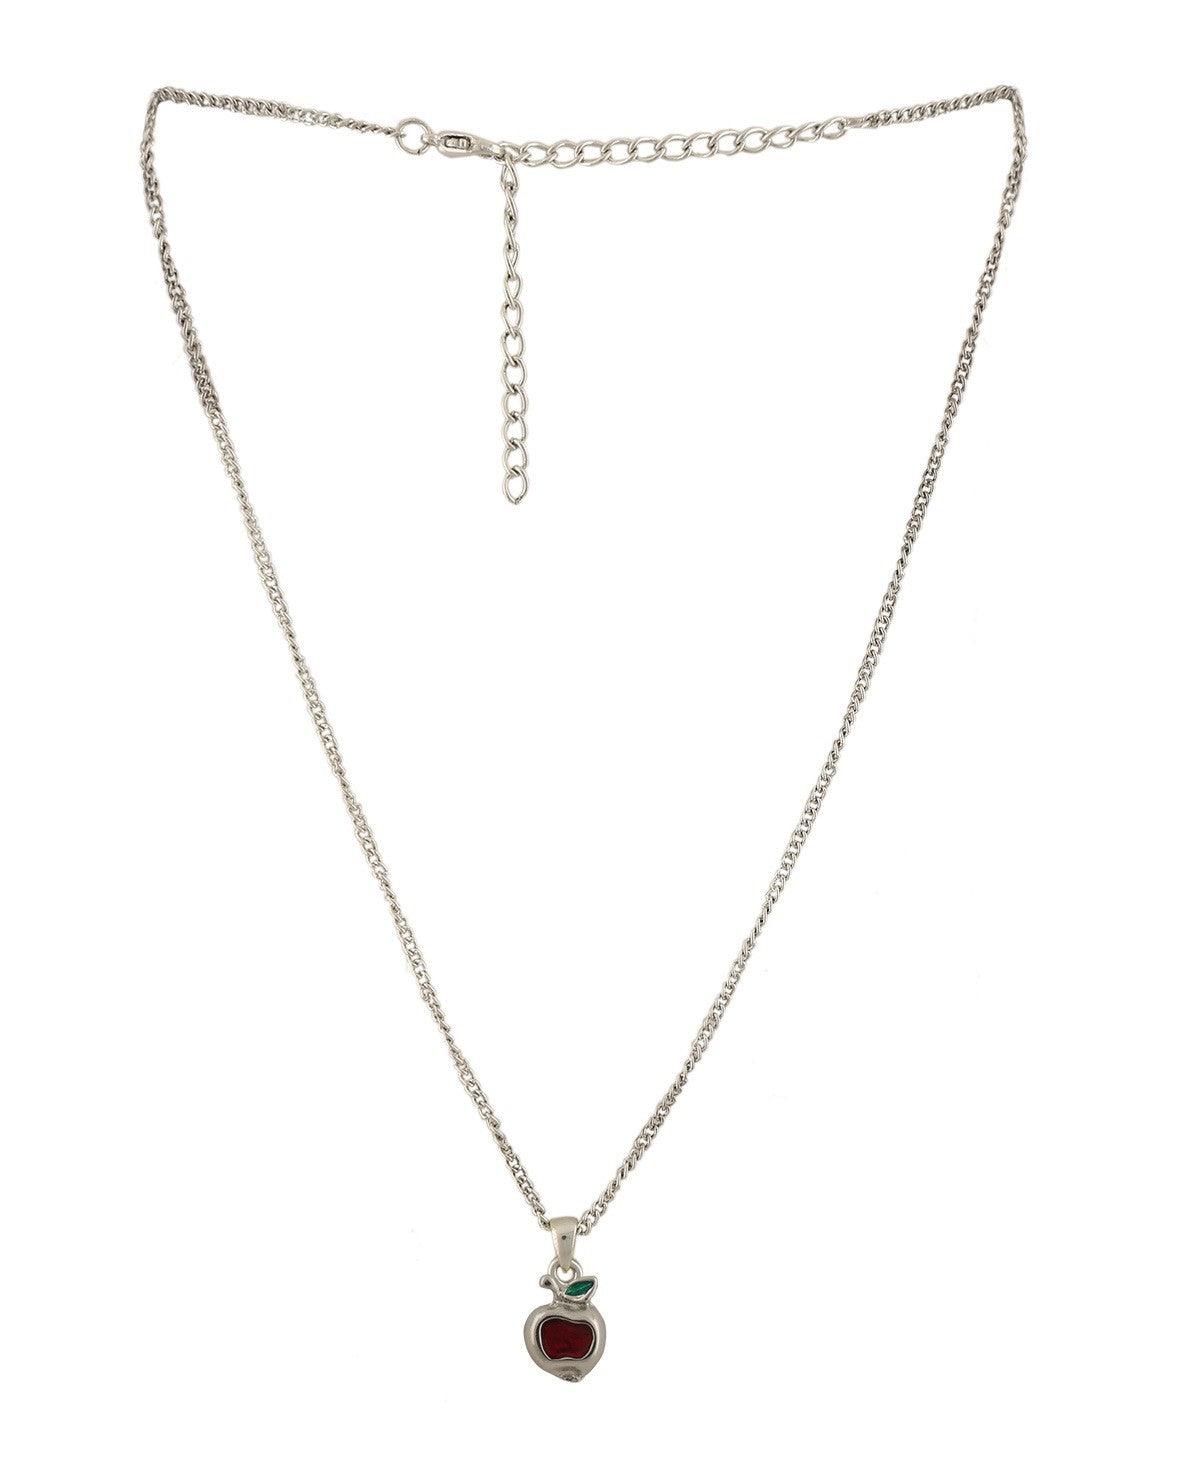 Junior Jewels Kids' Sterling Silver Box Chain Necklace